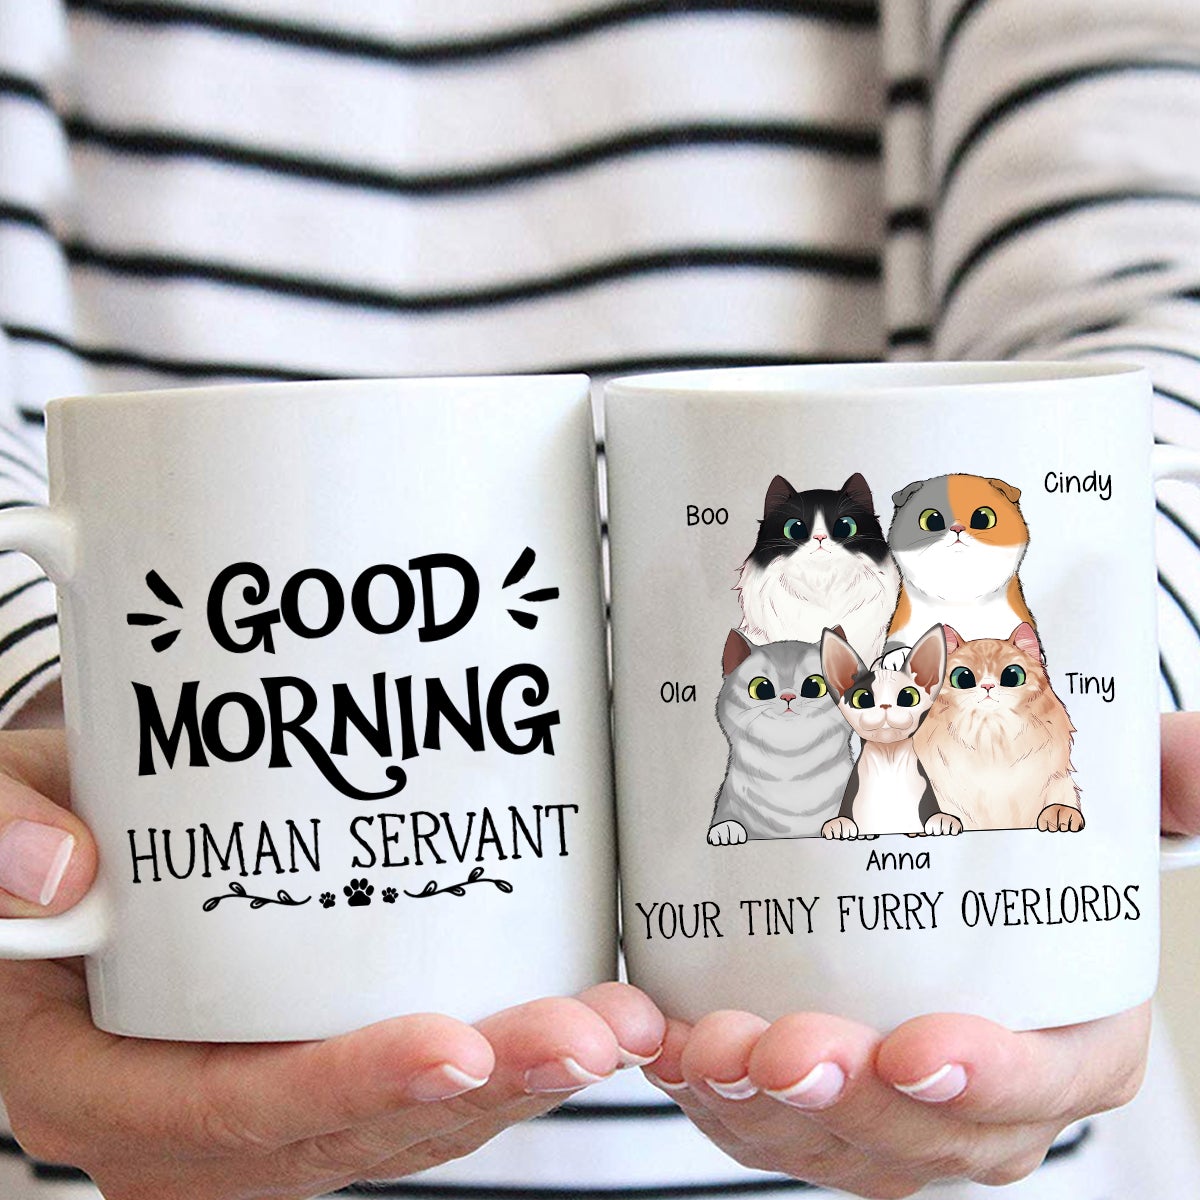 Witty Cat, Good Morning Human Servant From Your Tiny Furry Overlord Personalized Mug banner_2a8f3bad-ab01-4986-8caf-a6bbaad981f6.jpg?v=1625888164